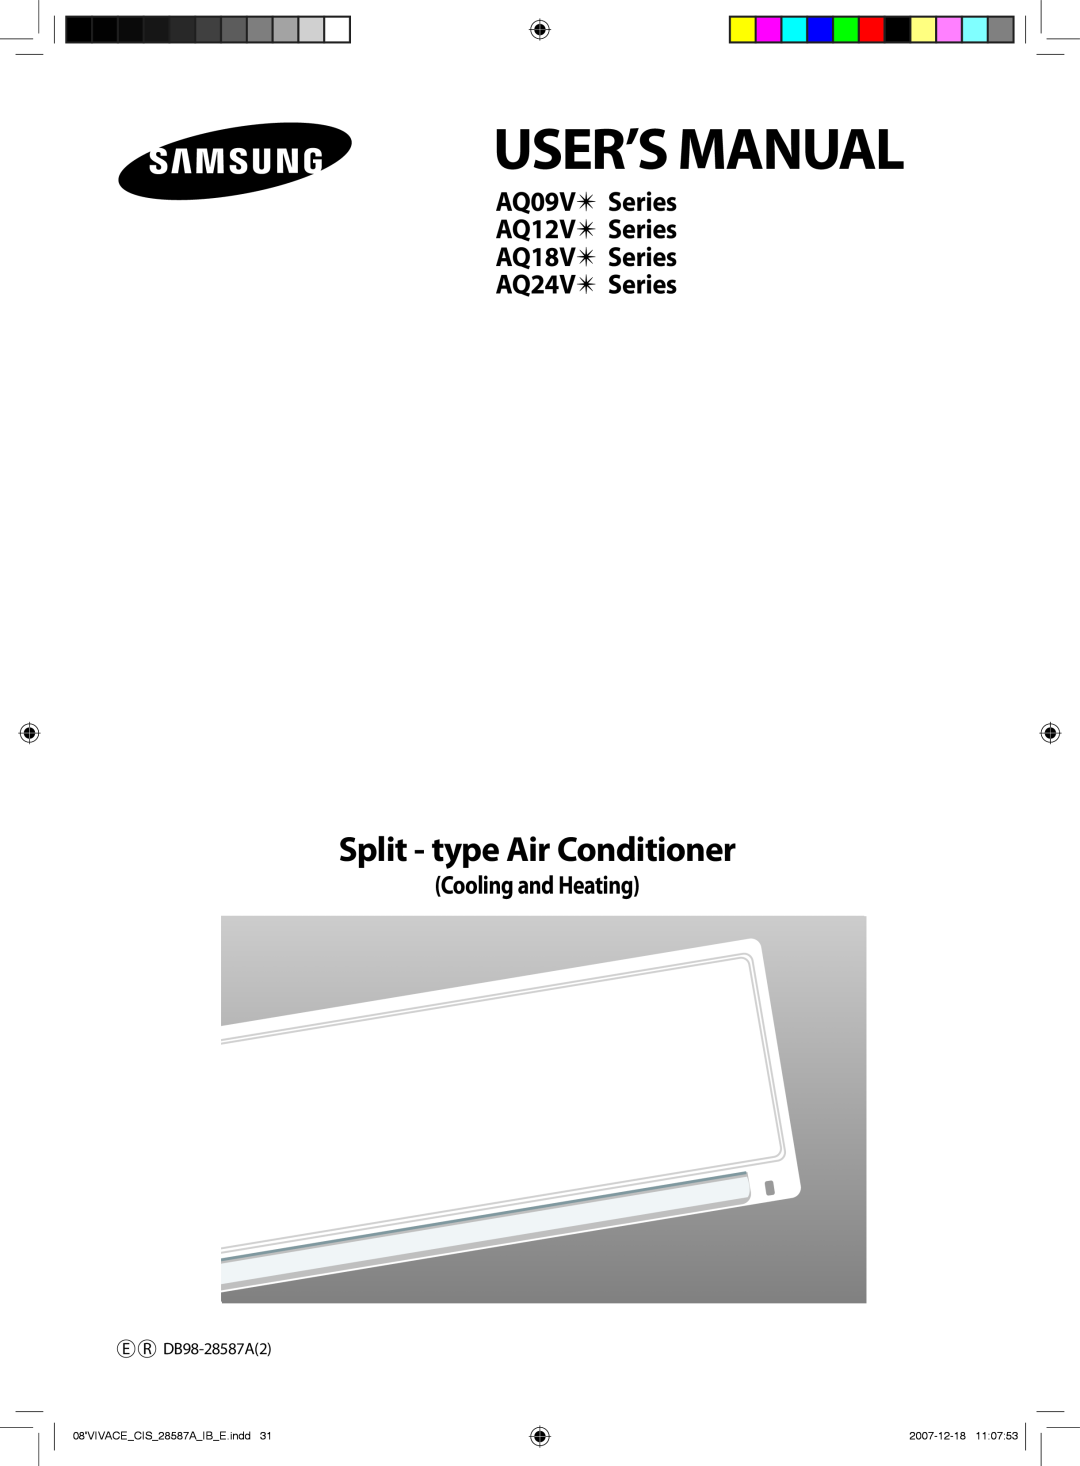 Samsung AQ18VBCXUMG manual User’S Manual, Split - type Air Conditioner, Cooling and Heating, E R DB98-28587A2, 2007-12-18 